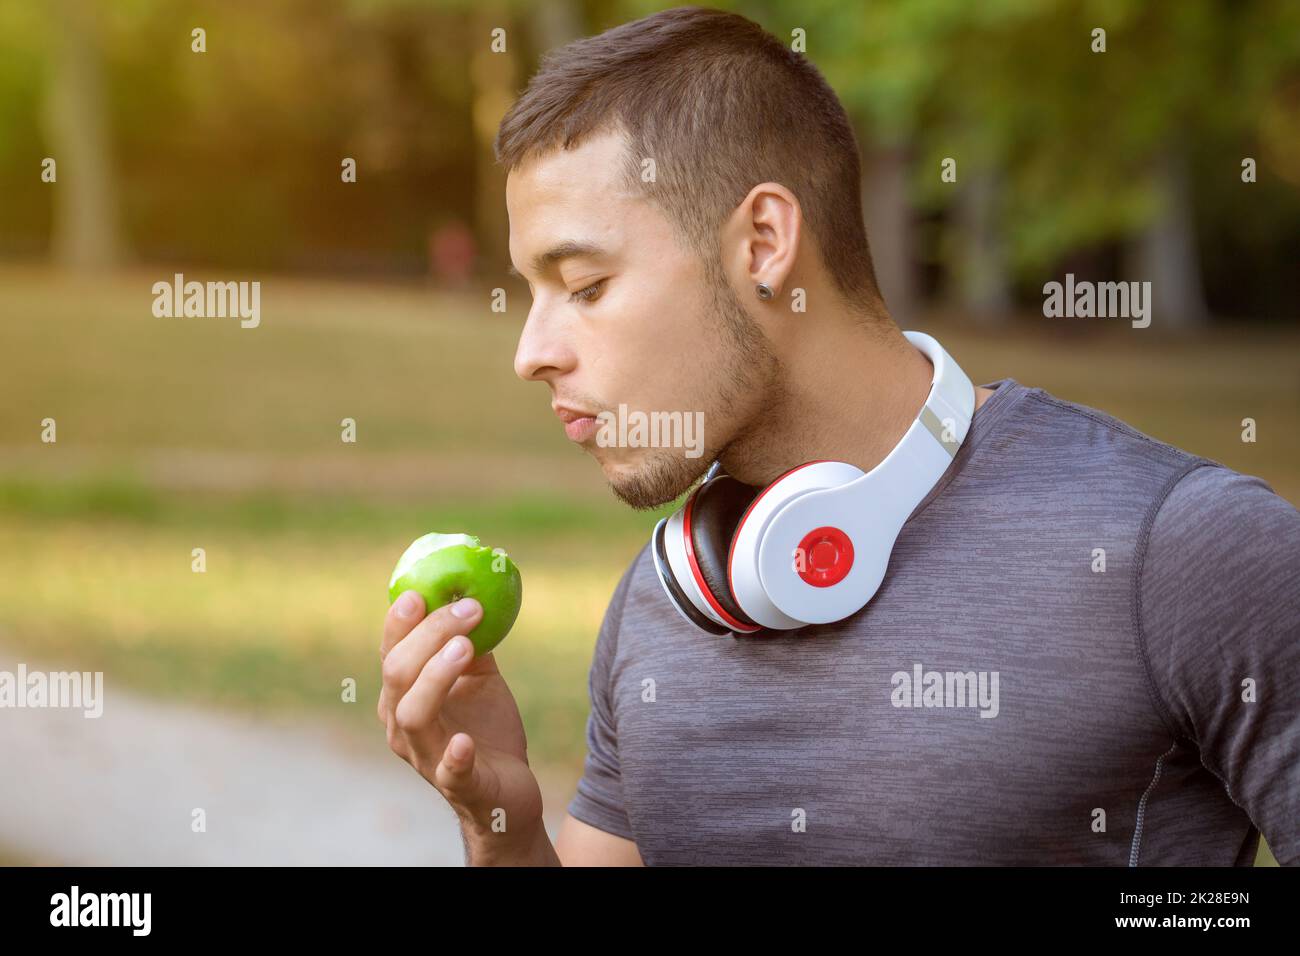 Young man eating an apple runner sports training workout fitness copyspace copy space Stock Photo